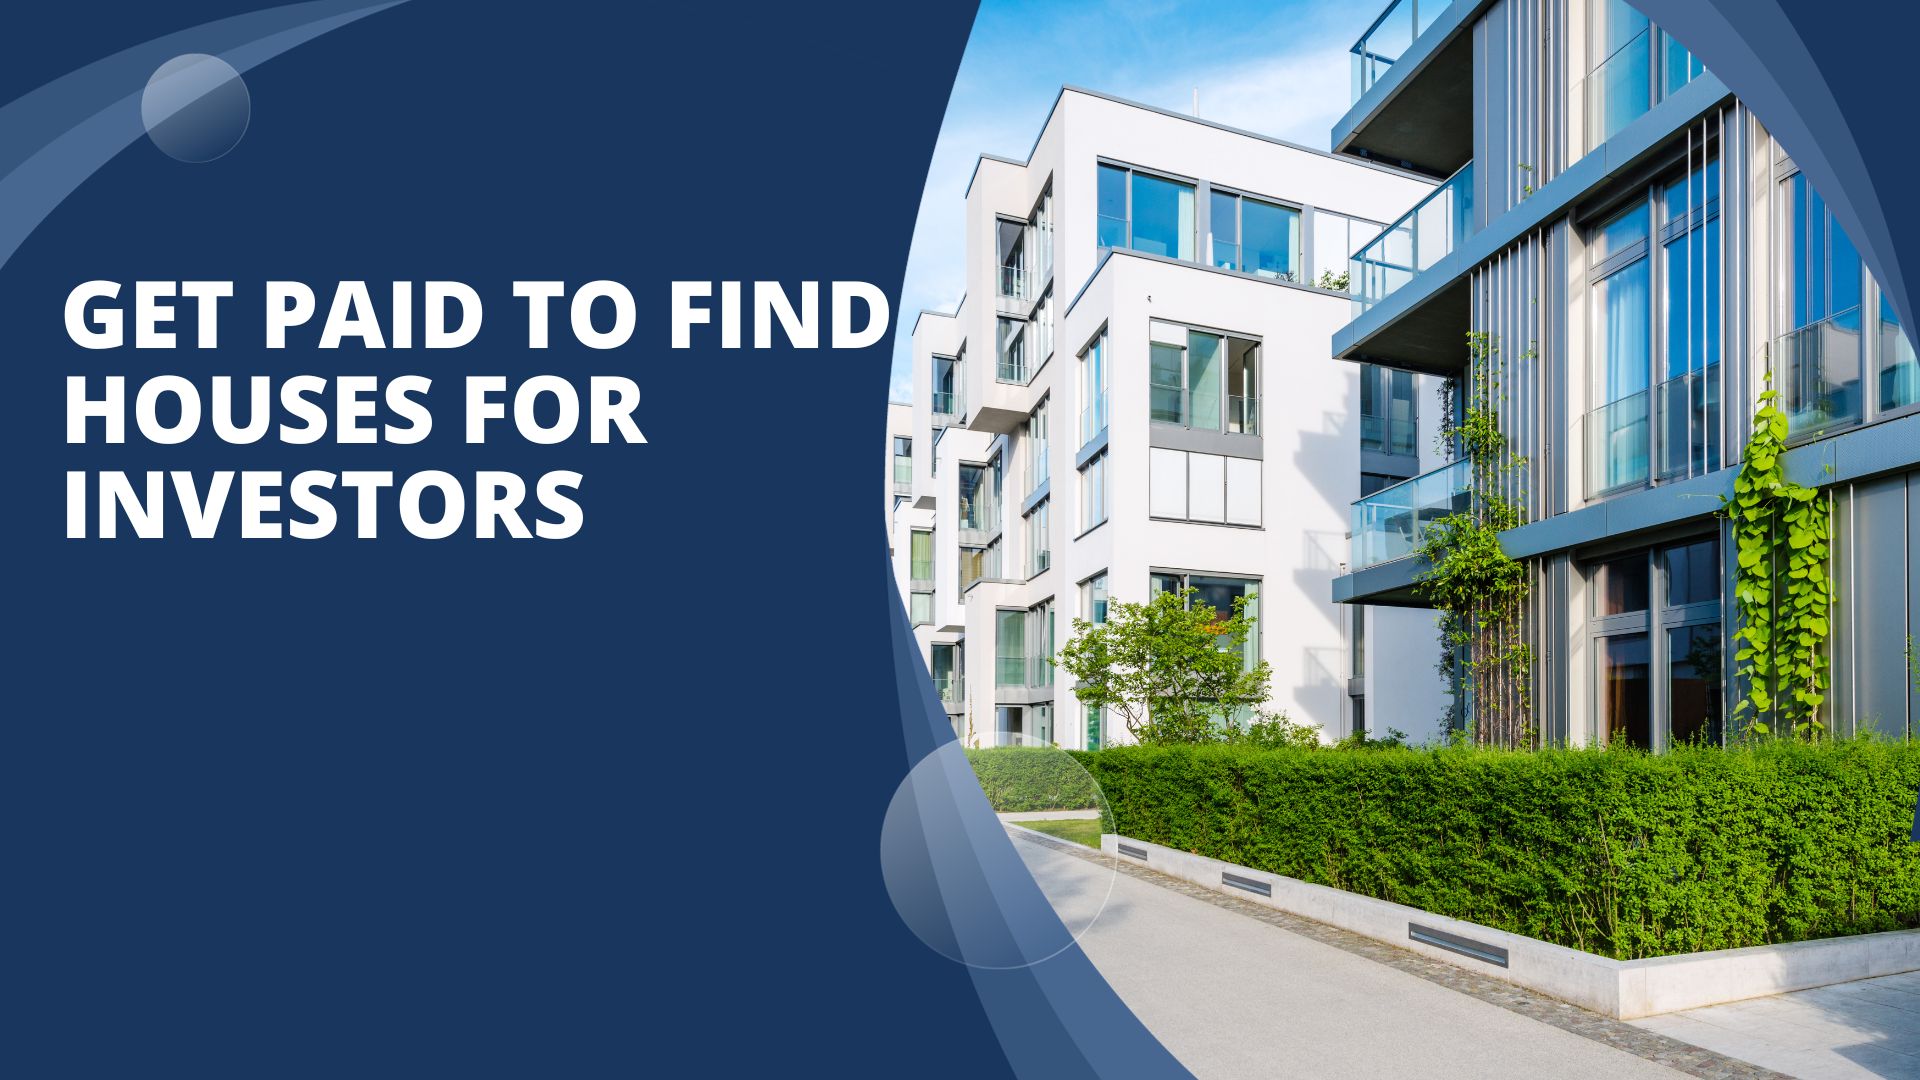 Get Paid to Find Houses for Investors